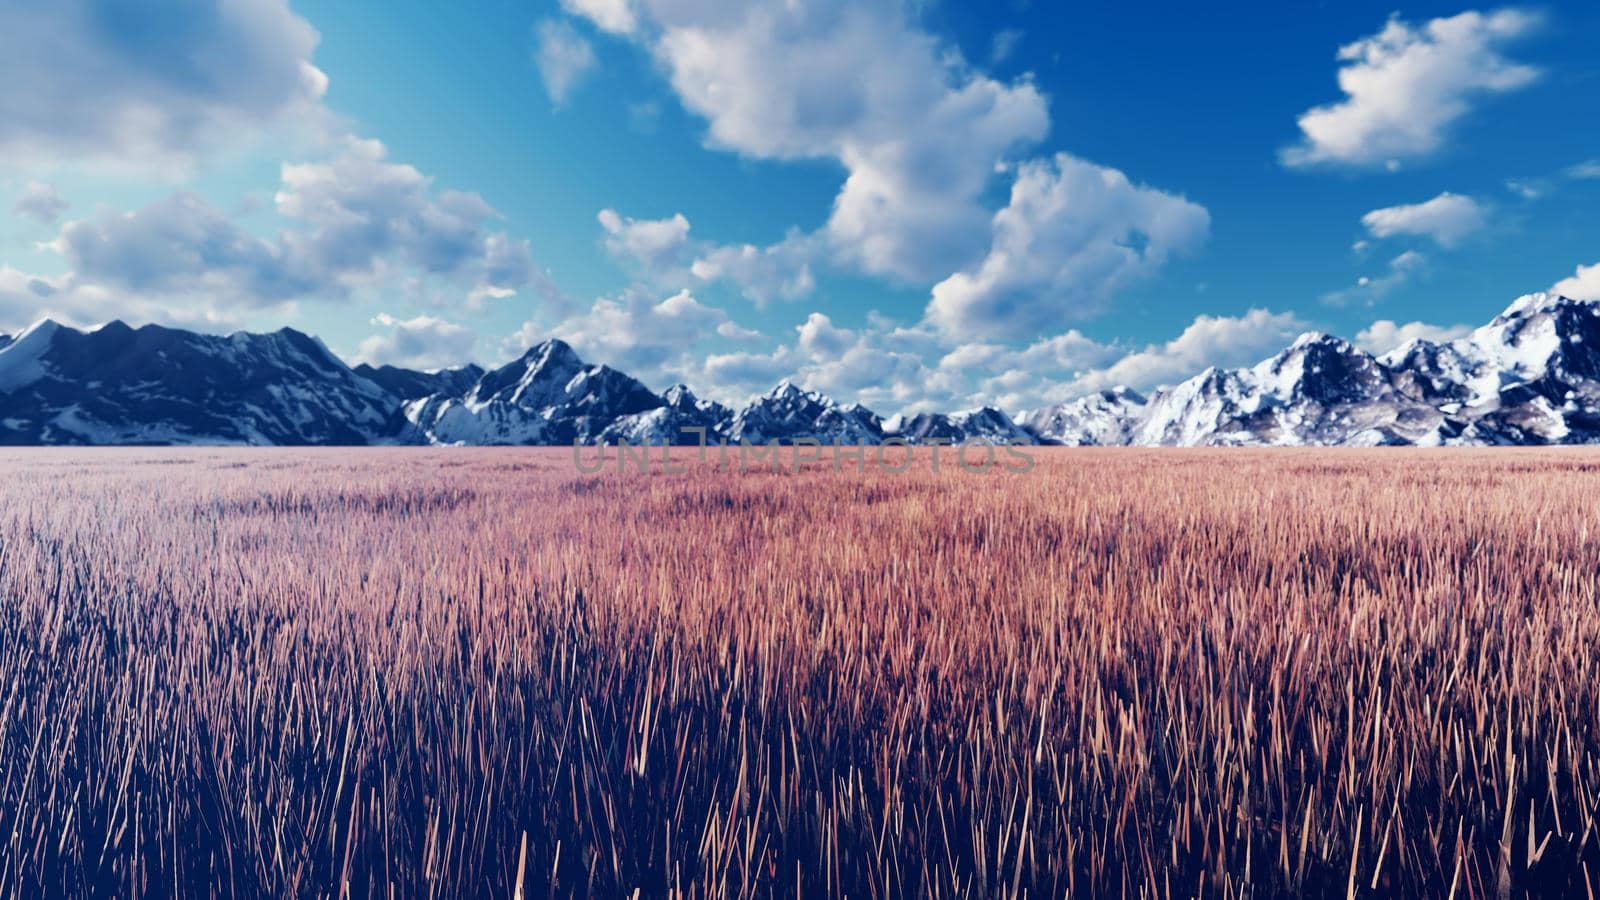 Mystical view, unusual grass, blue sky with clouds, morning sun and mountains in the distance.